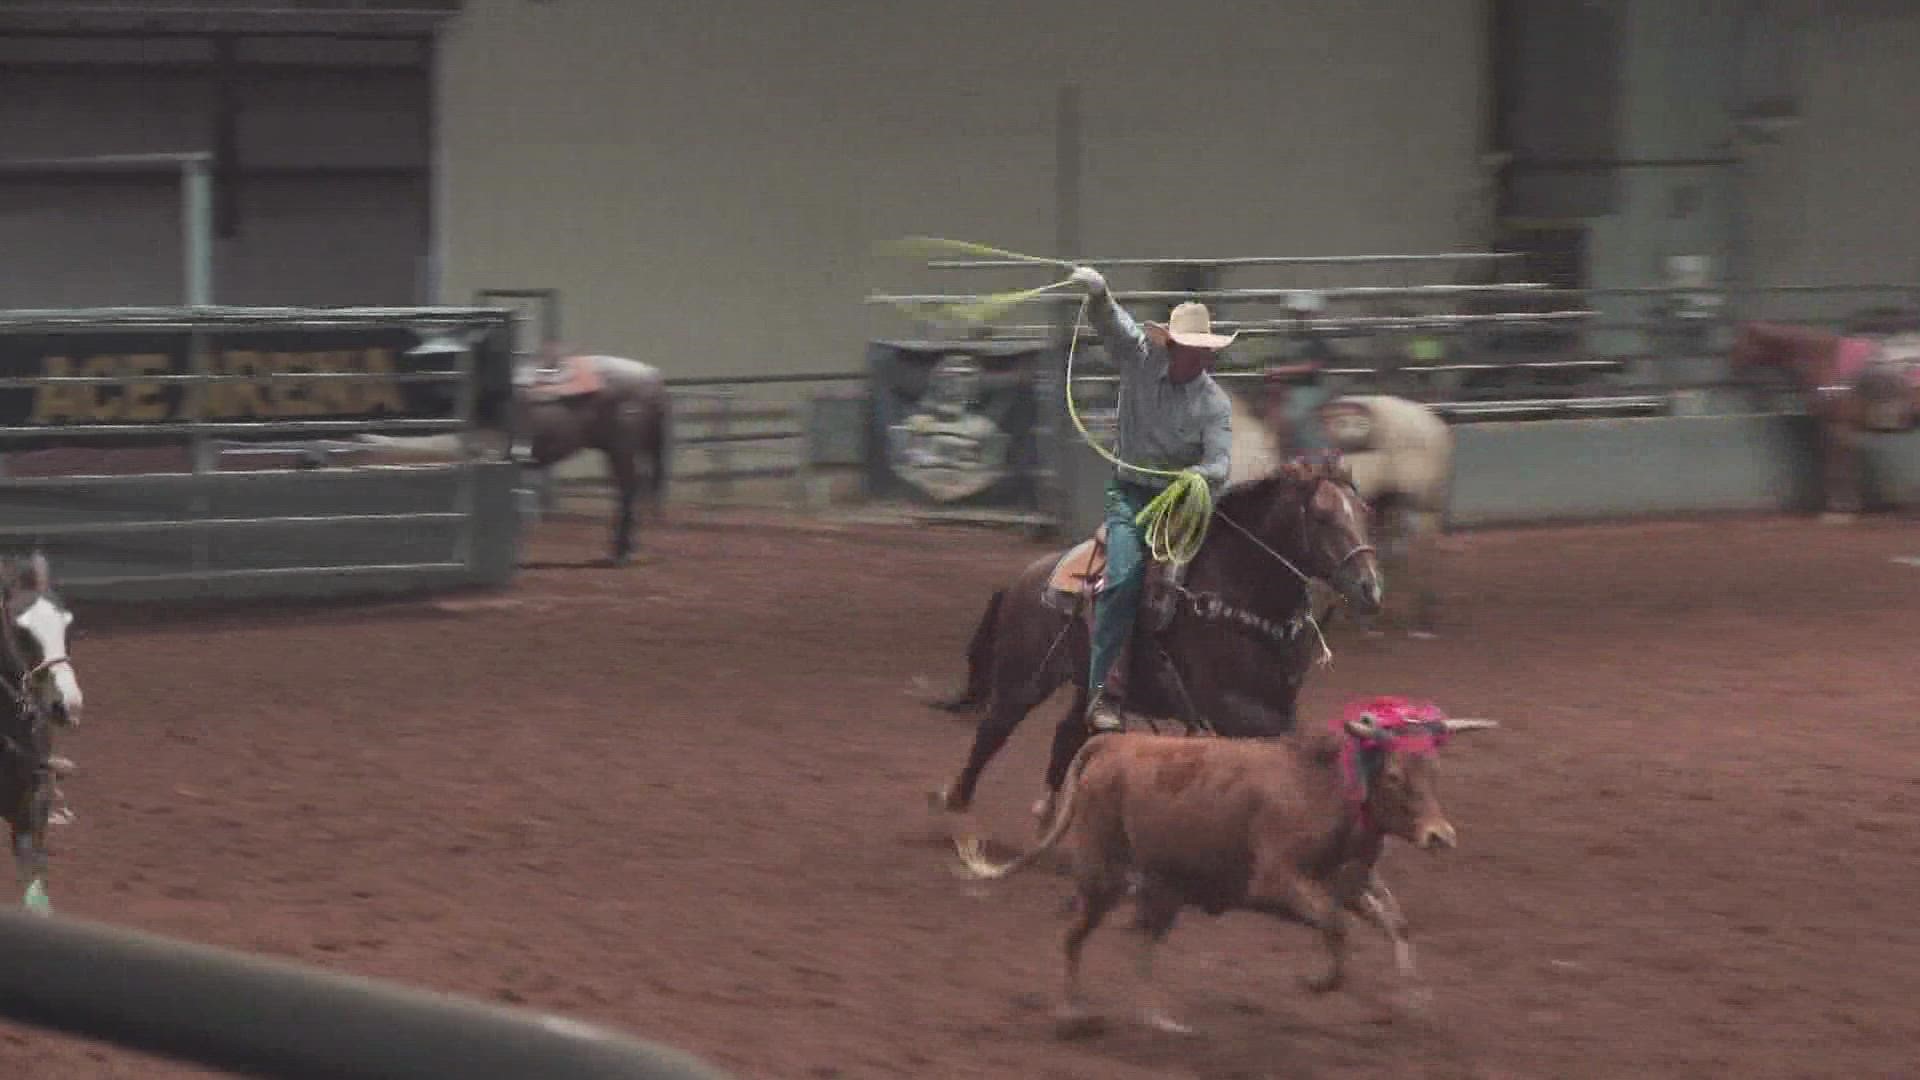 The event center regularly features team roping competitions, motorcross and craft fairs.